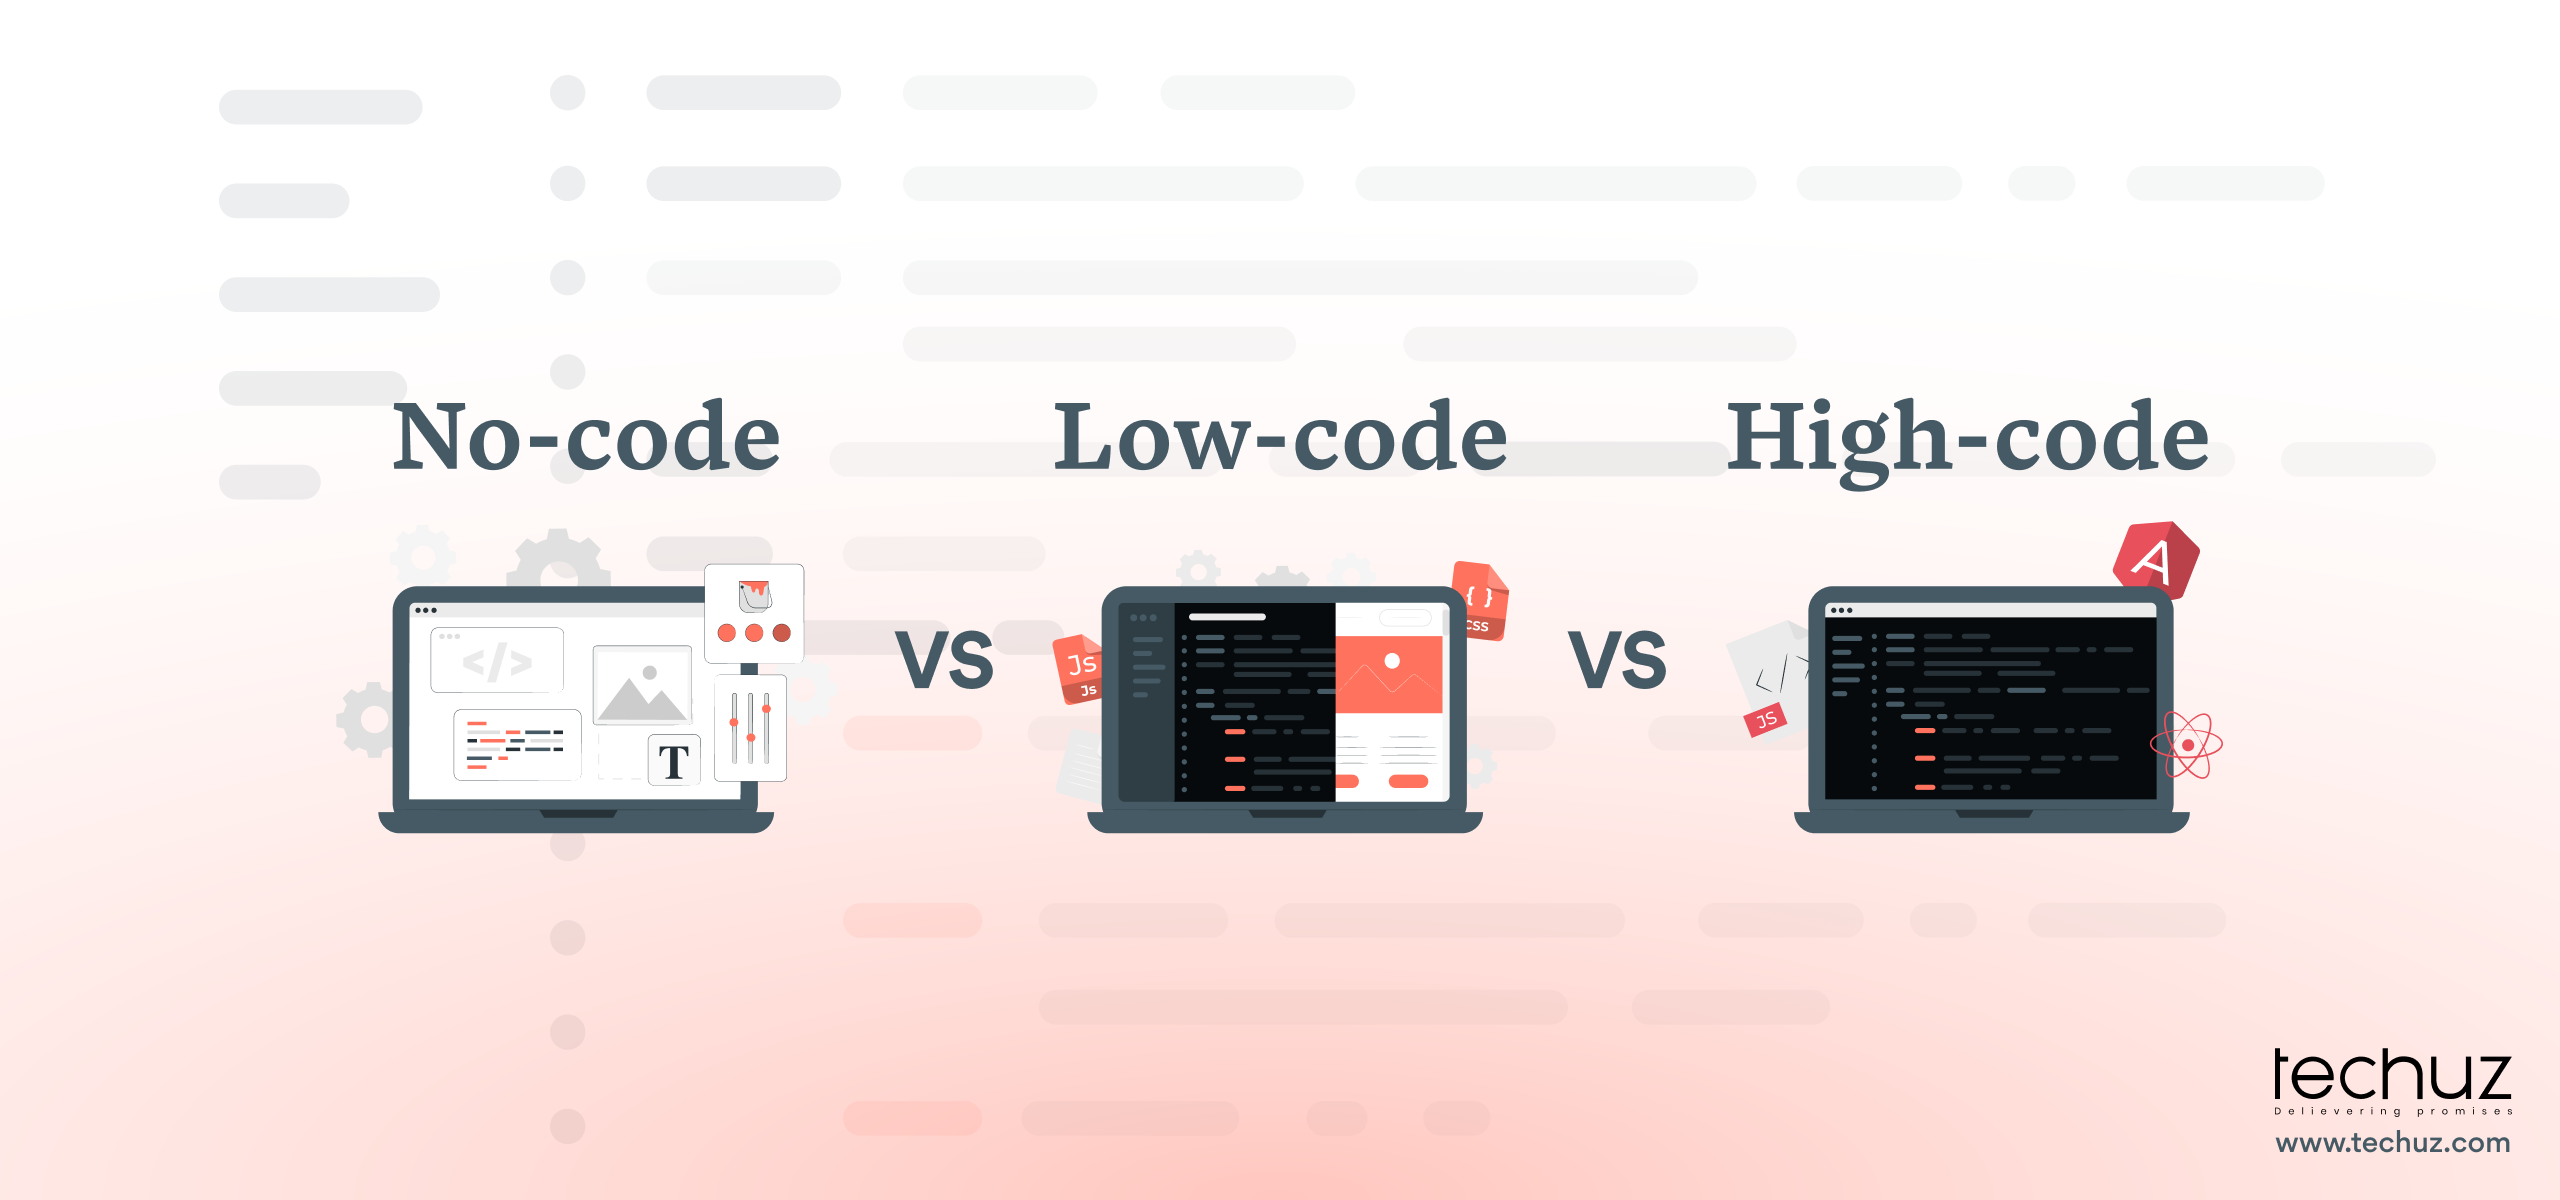 No-Code, Low-Code, High-Code: Ideal Development Approach Explained